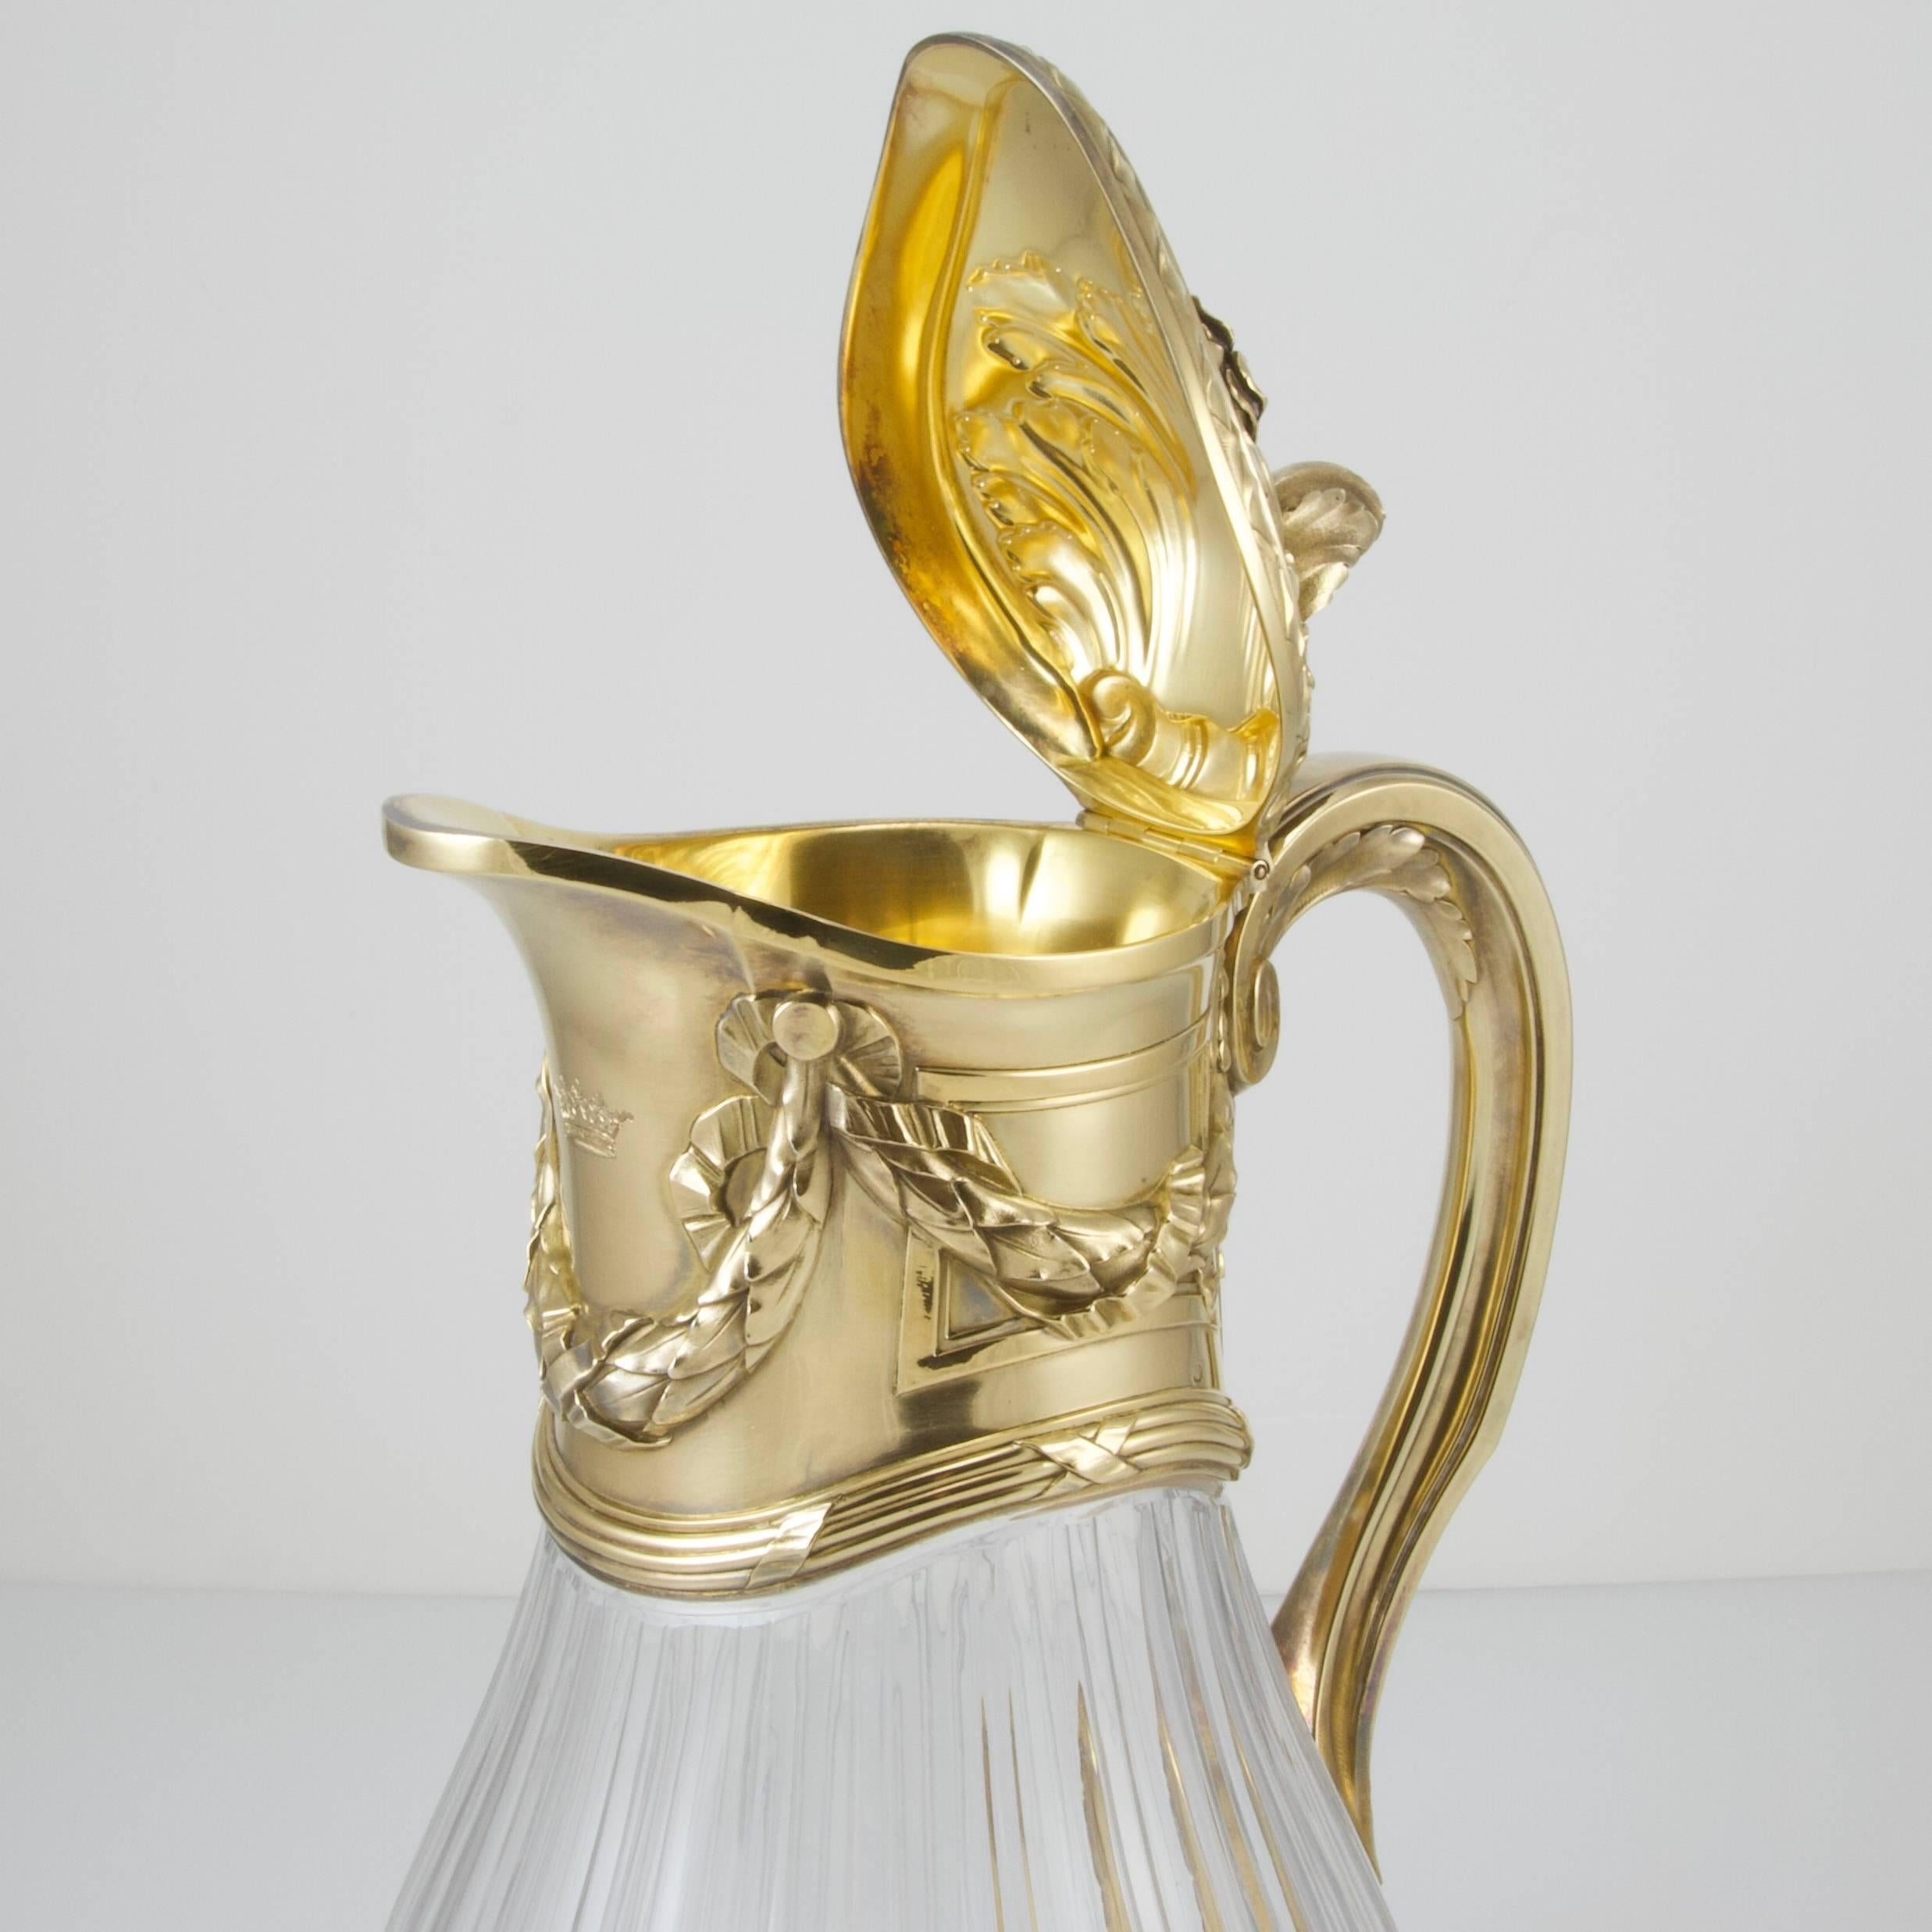 French Antique Silver Gilt and Cristal Champagne Jug by Risler & Carré, Paris, 1900 For Sale